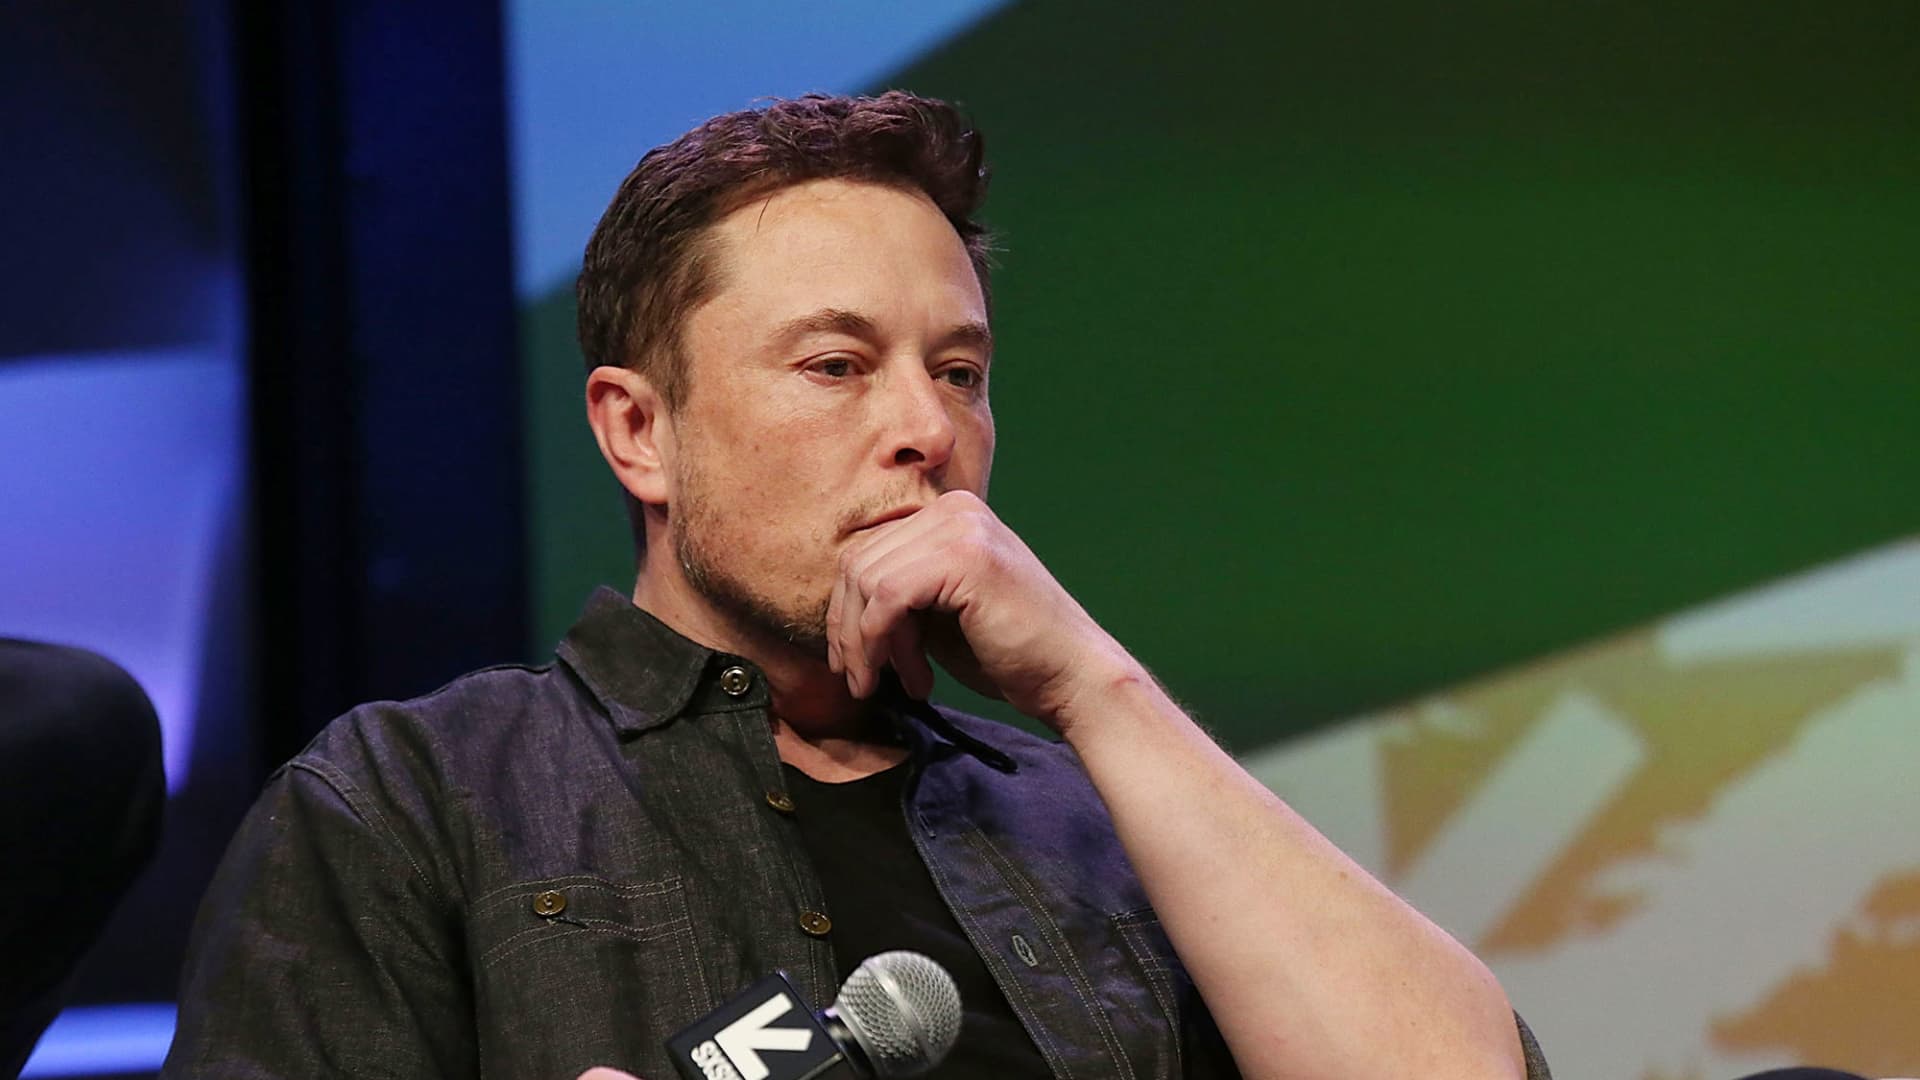 Elon Musk backs ‘tight’ background checks for all gun sales in wake of mass shooting in Texas